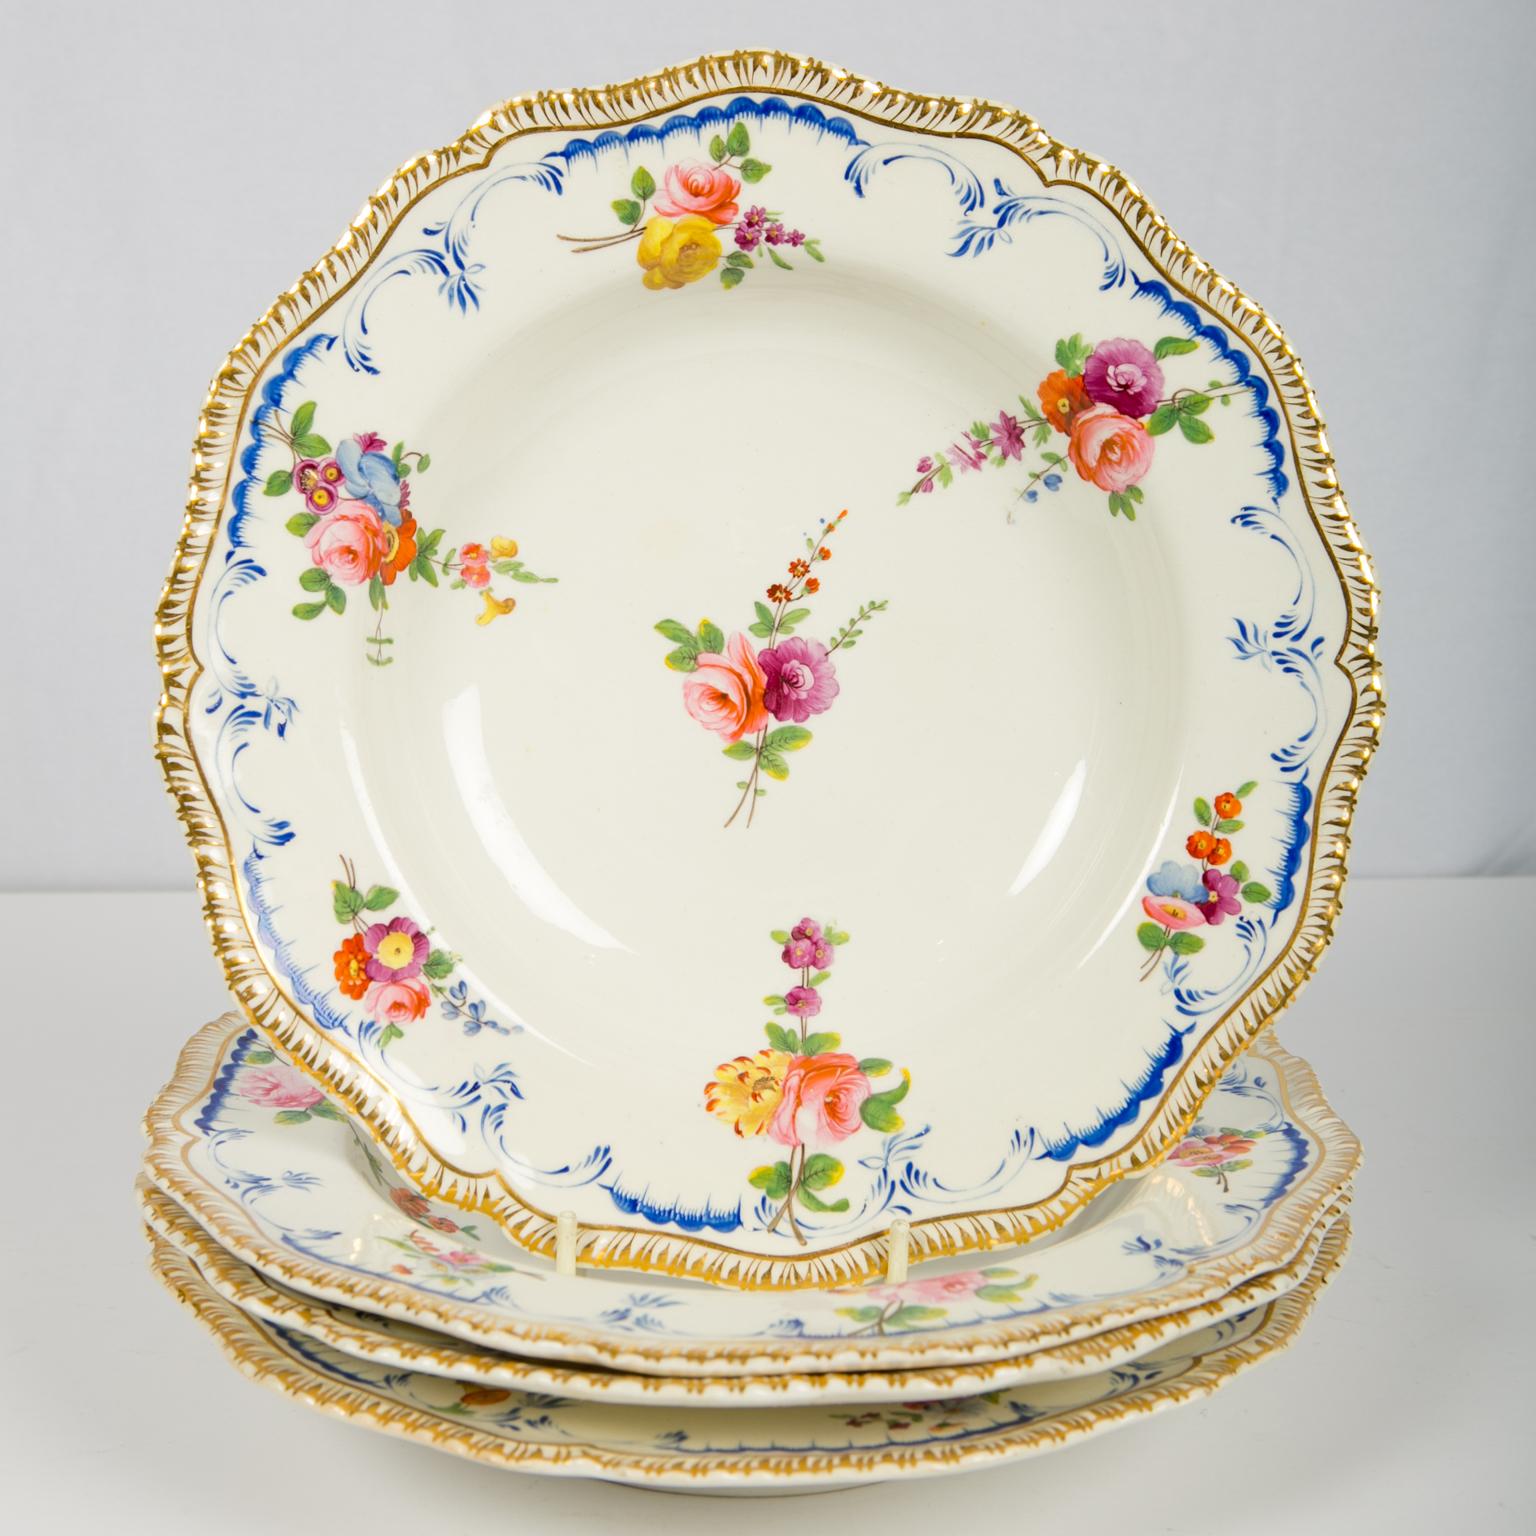 We are pleased to offer this set of four antique soup dishes made by Coalport n England, circa 1820. We also have a set of four matching large dinner dishes in the same pattern. See 1st Dibs Ref. # Ref: LU866511782291. The style of these soup dishes